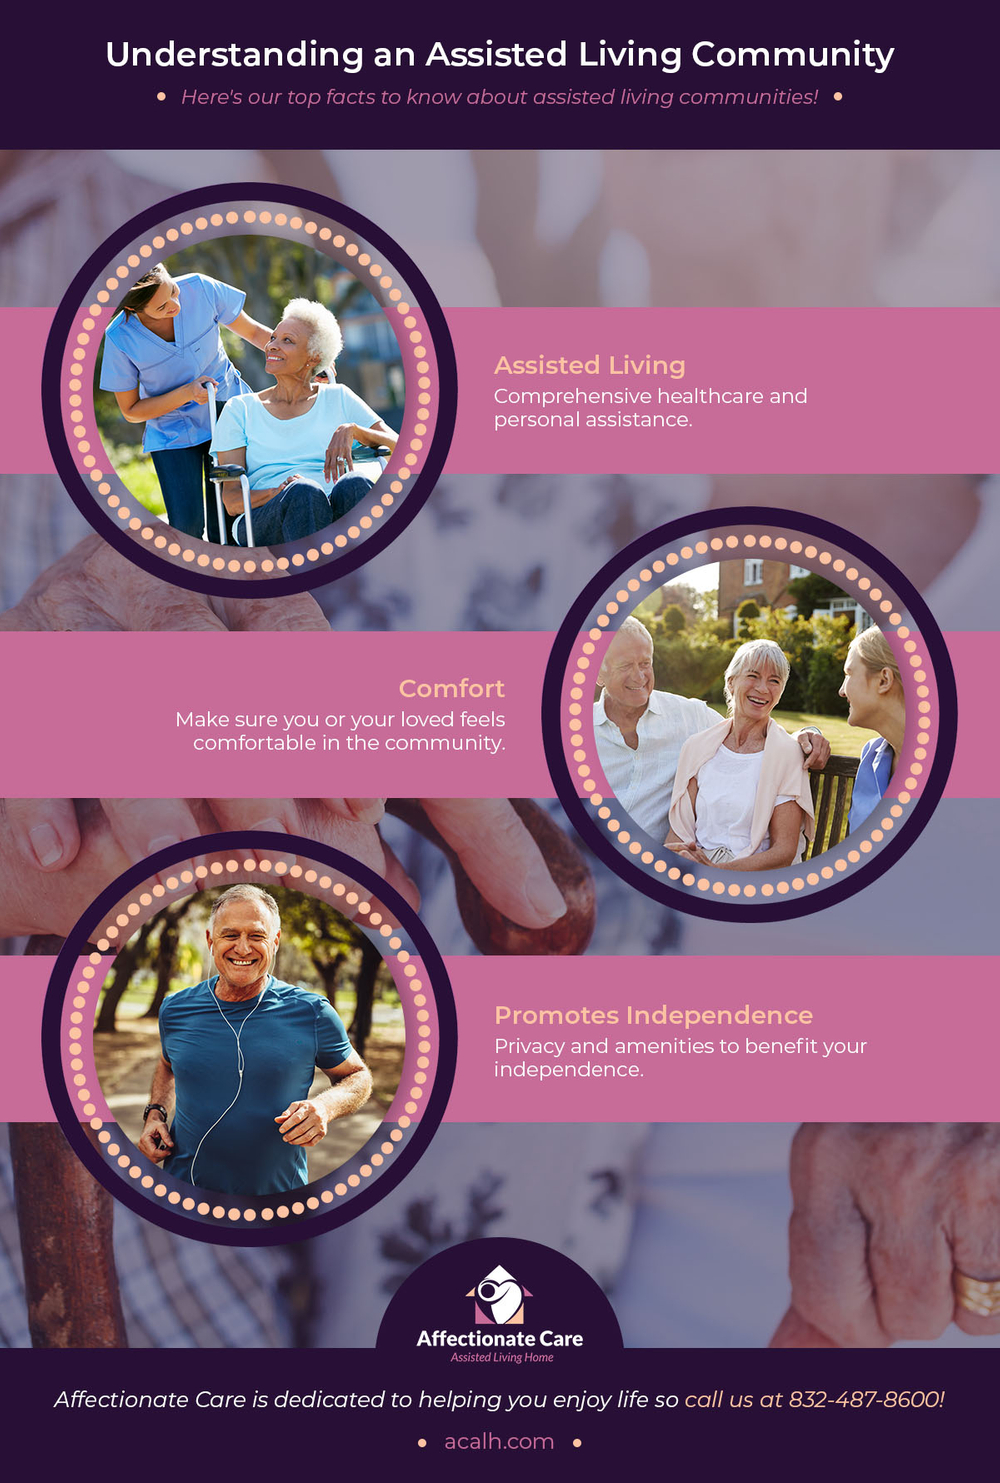 Understanding an Assisted Living Community Infographic.jpg